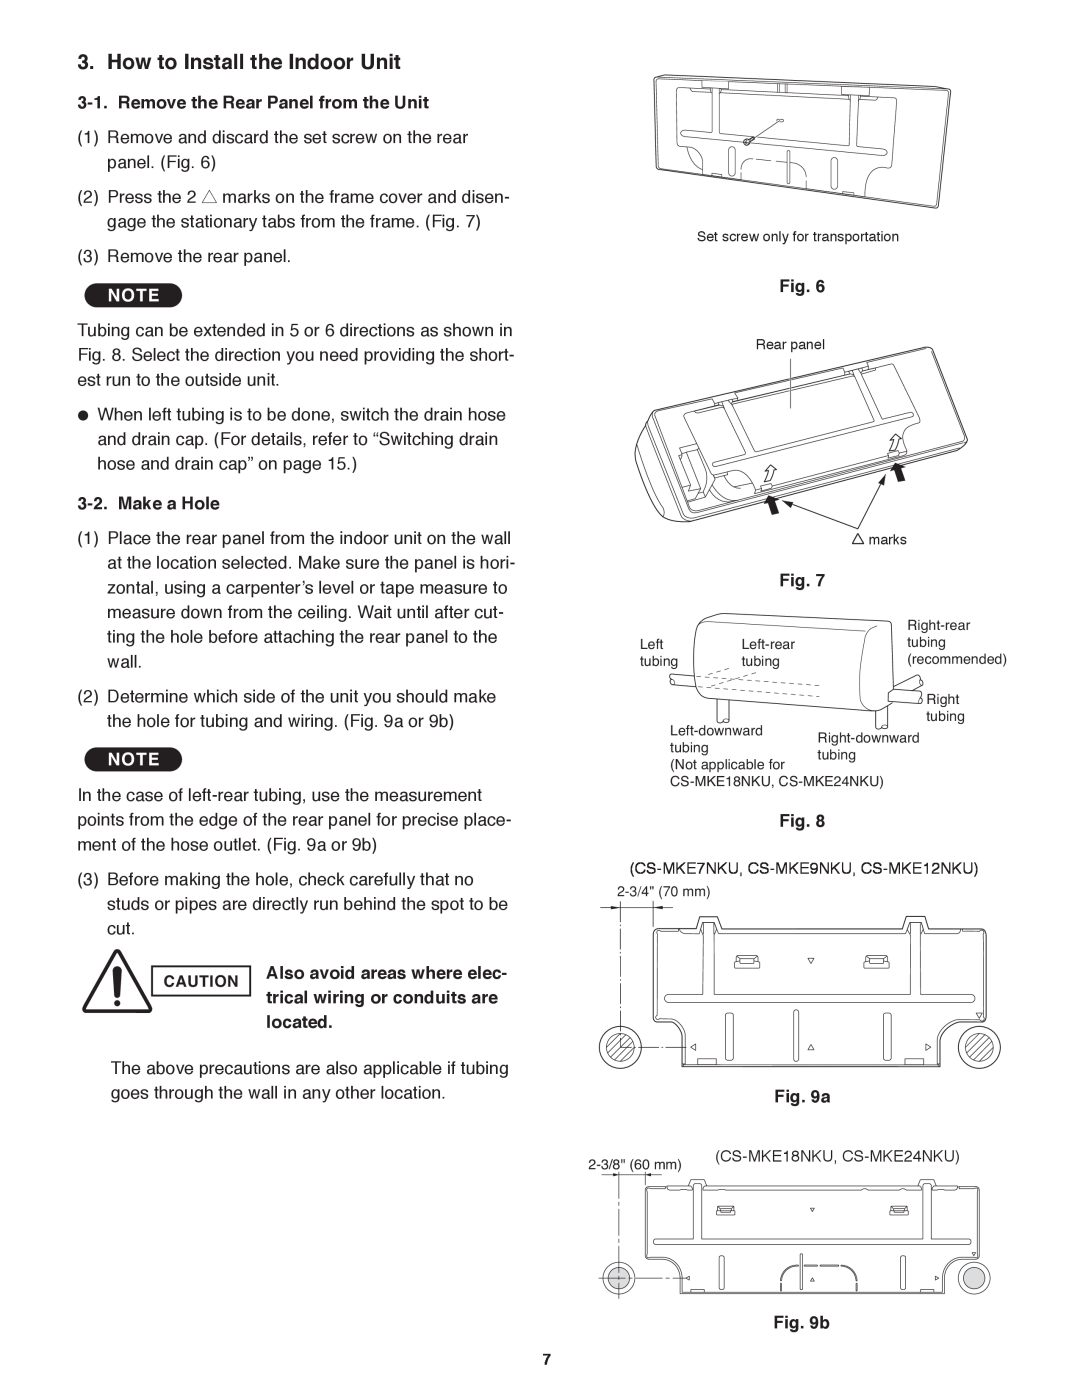 Panasonic CS-MKE18NKU How to Install the Indoor Unit, Remove the Rear Panel from the Unit, Make a Hole, located, b 